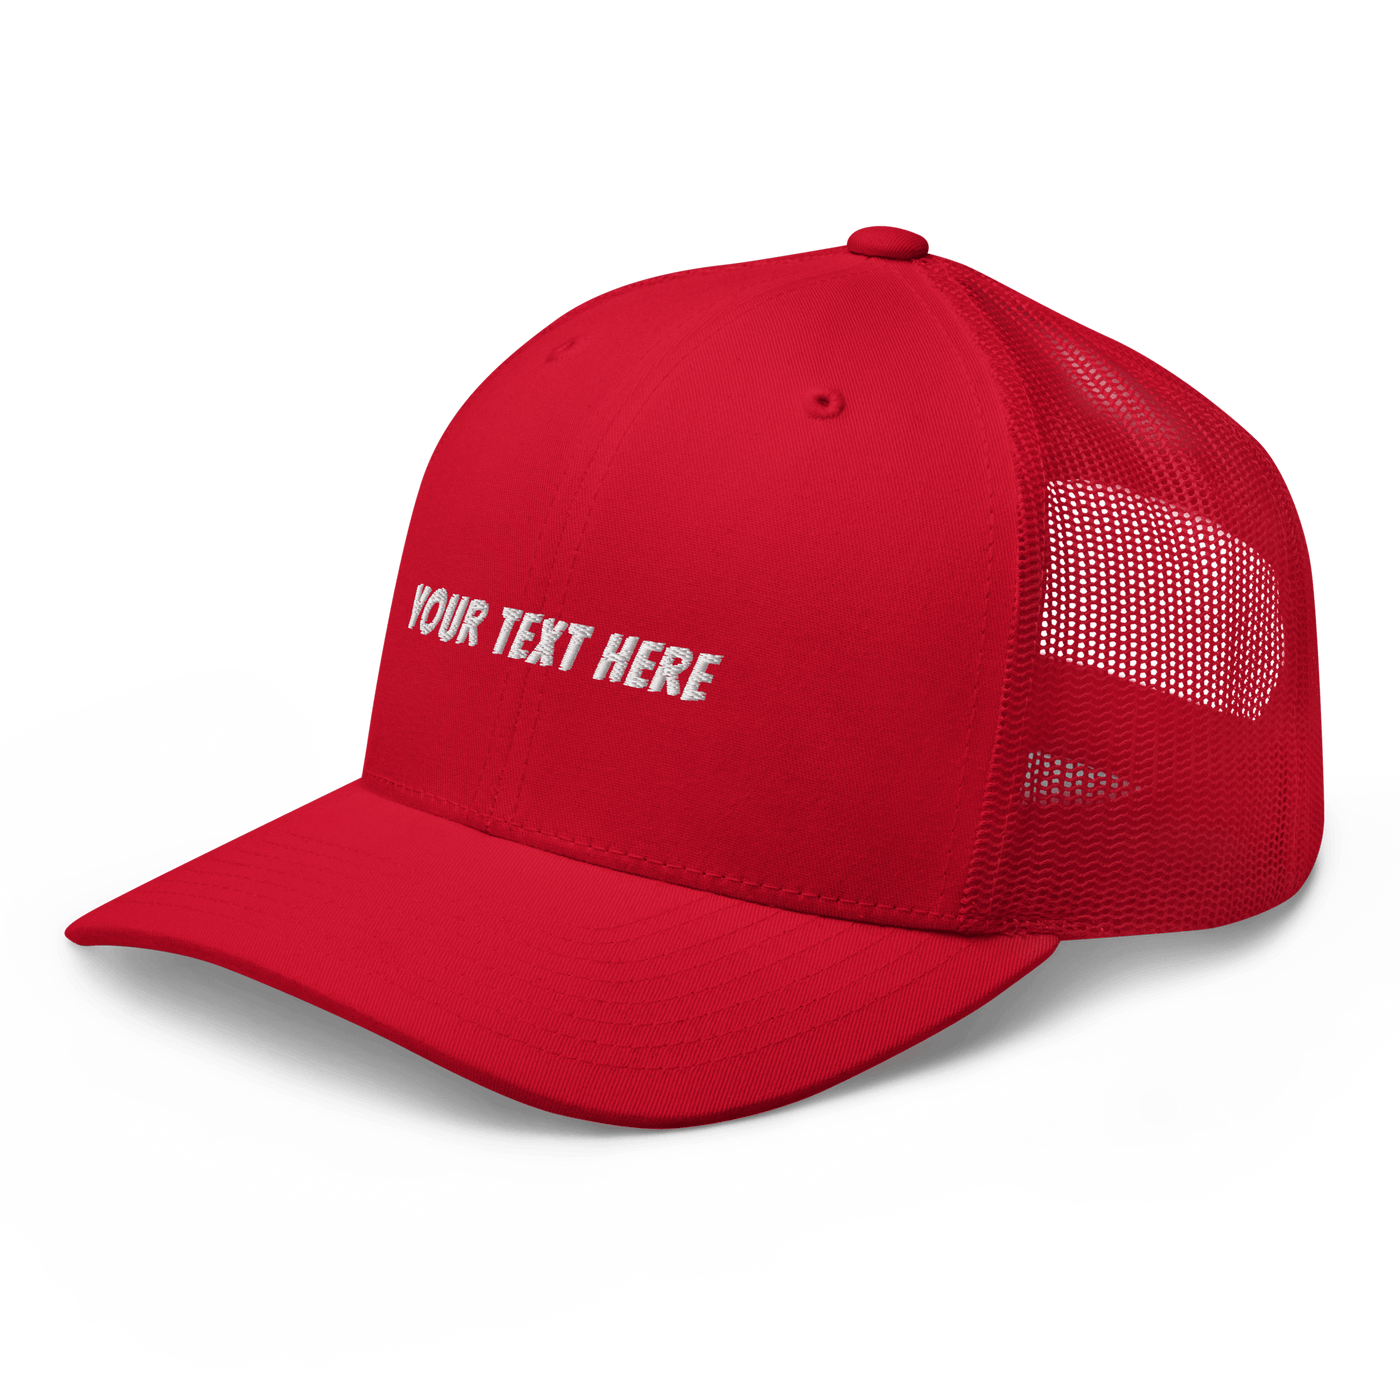 Customize Your Own Trucker Cap - Banger Font - Red - - Just Another Cap Store